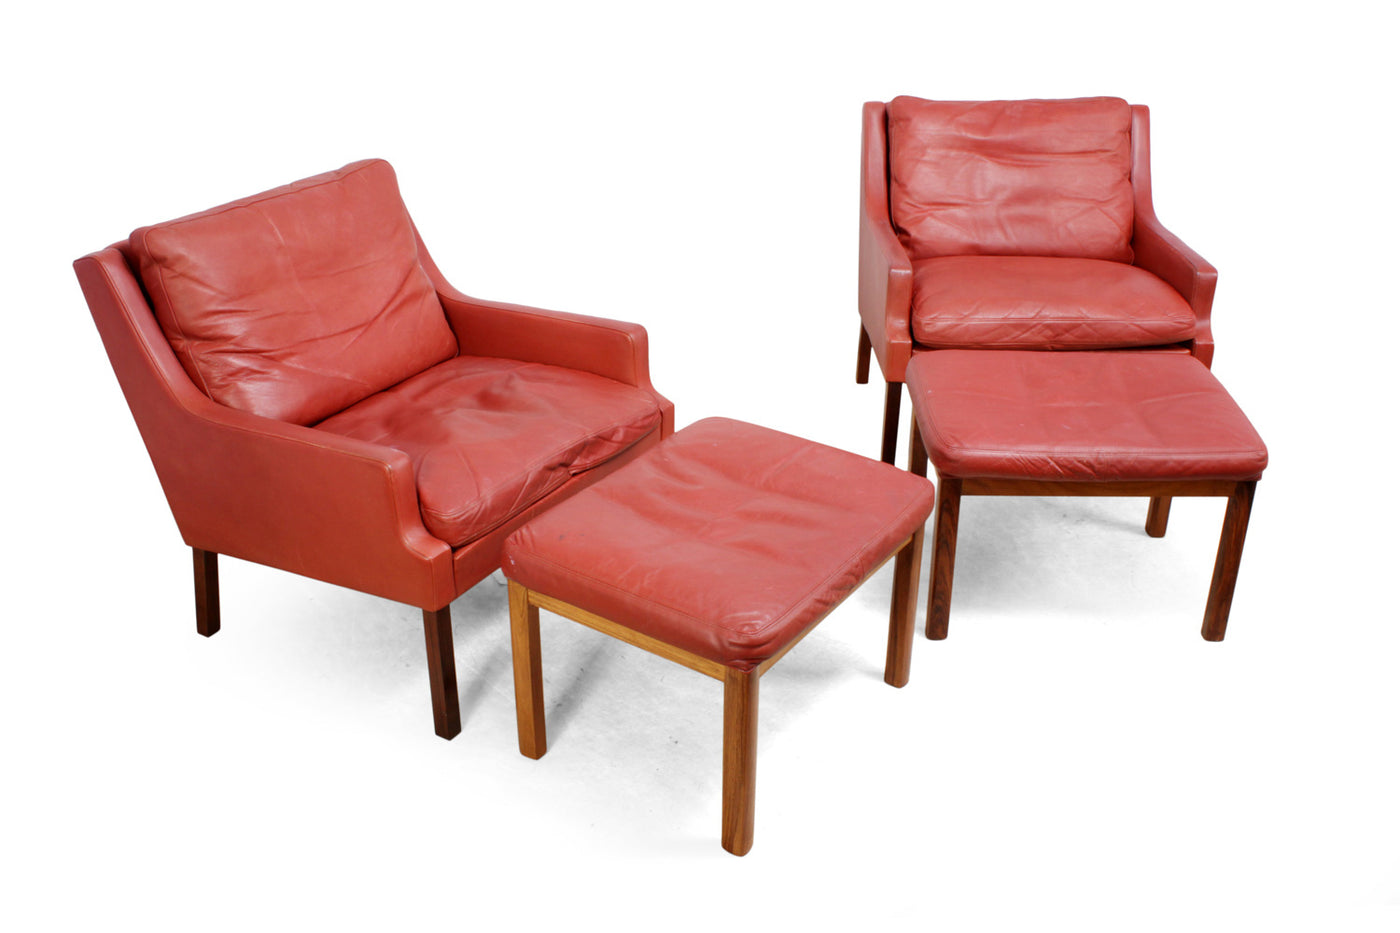 Danish Lounge Chairs in red leather with Stools